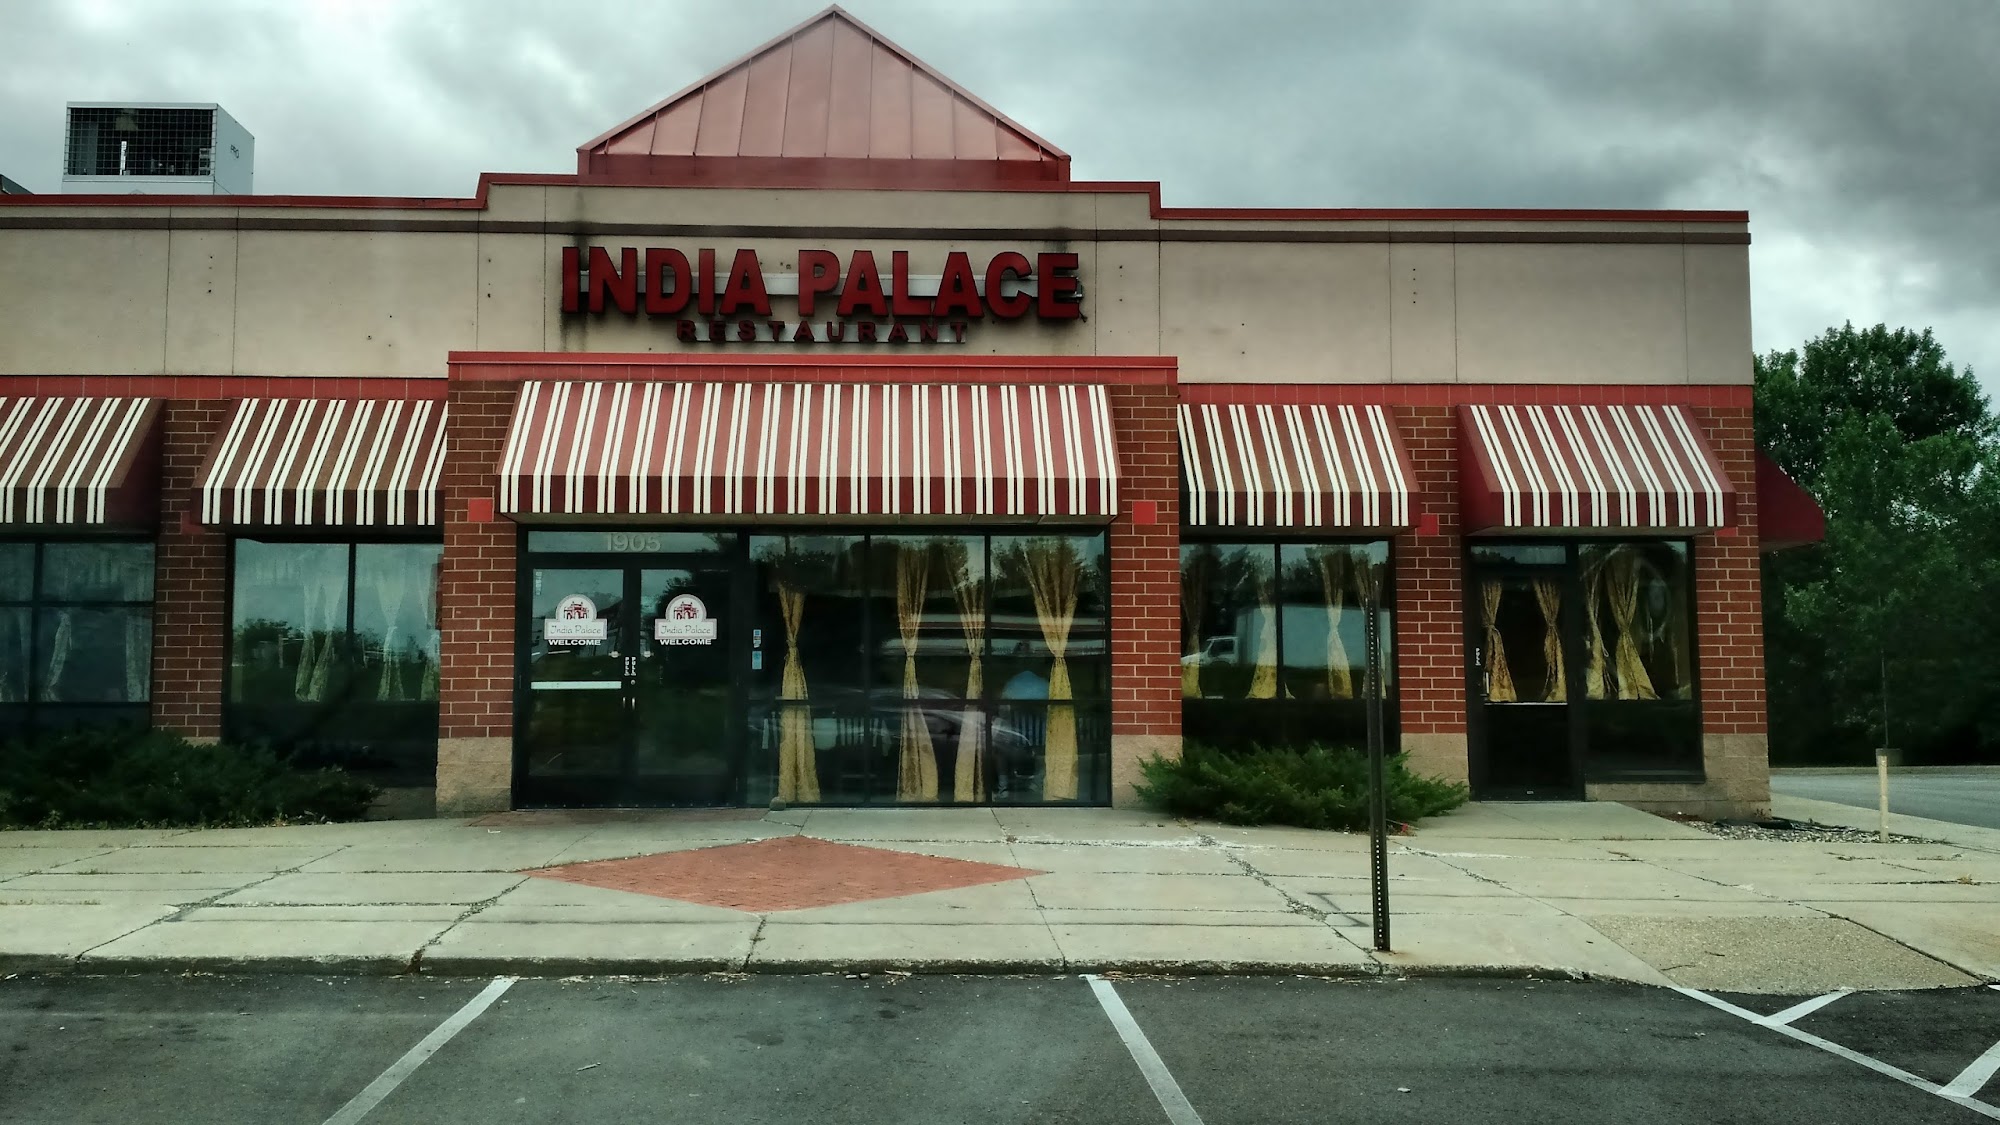 India Palace Grill